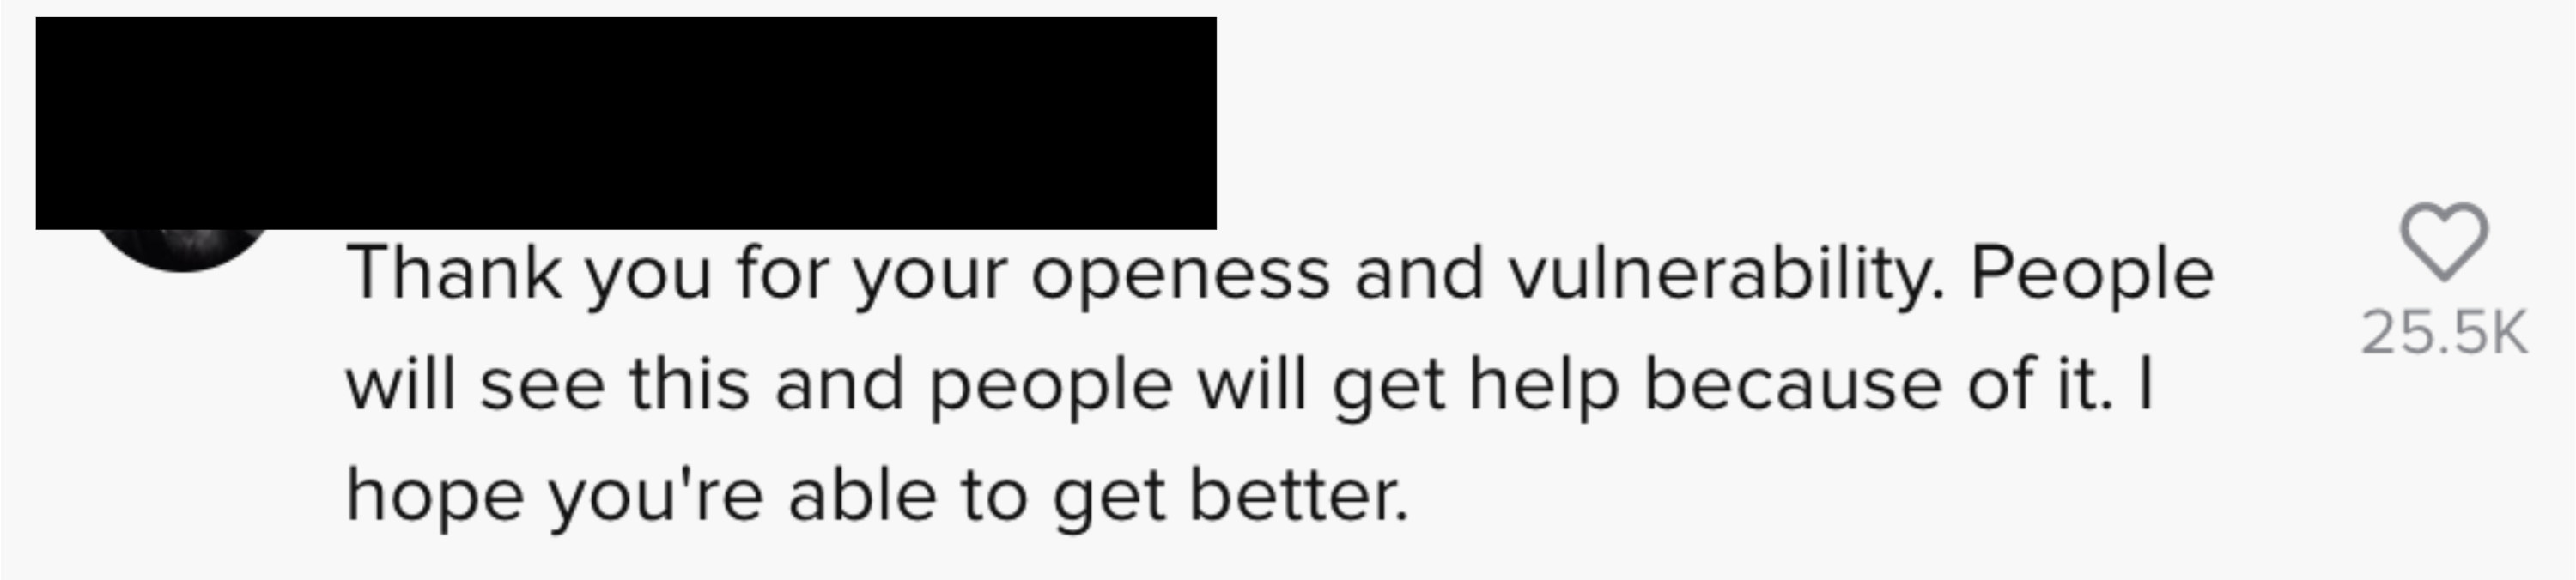 Commenter thanking her for her &quot;openness and vulnerability&quot; and telling her that people will see it and get help because of it and that they hope she gets better